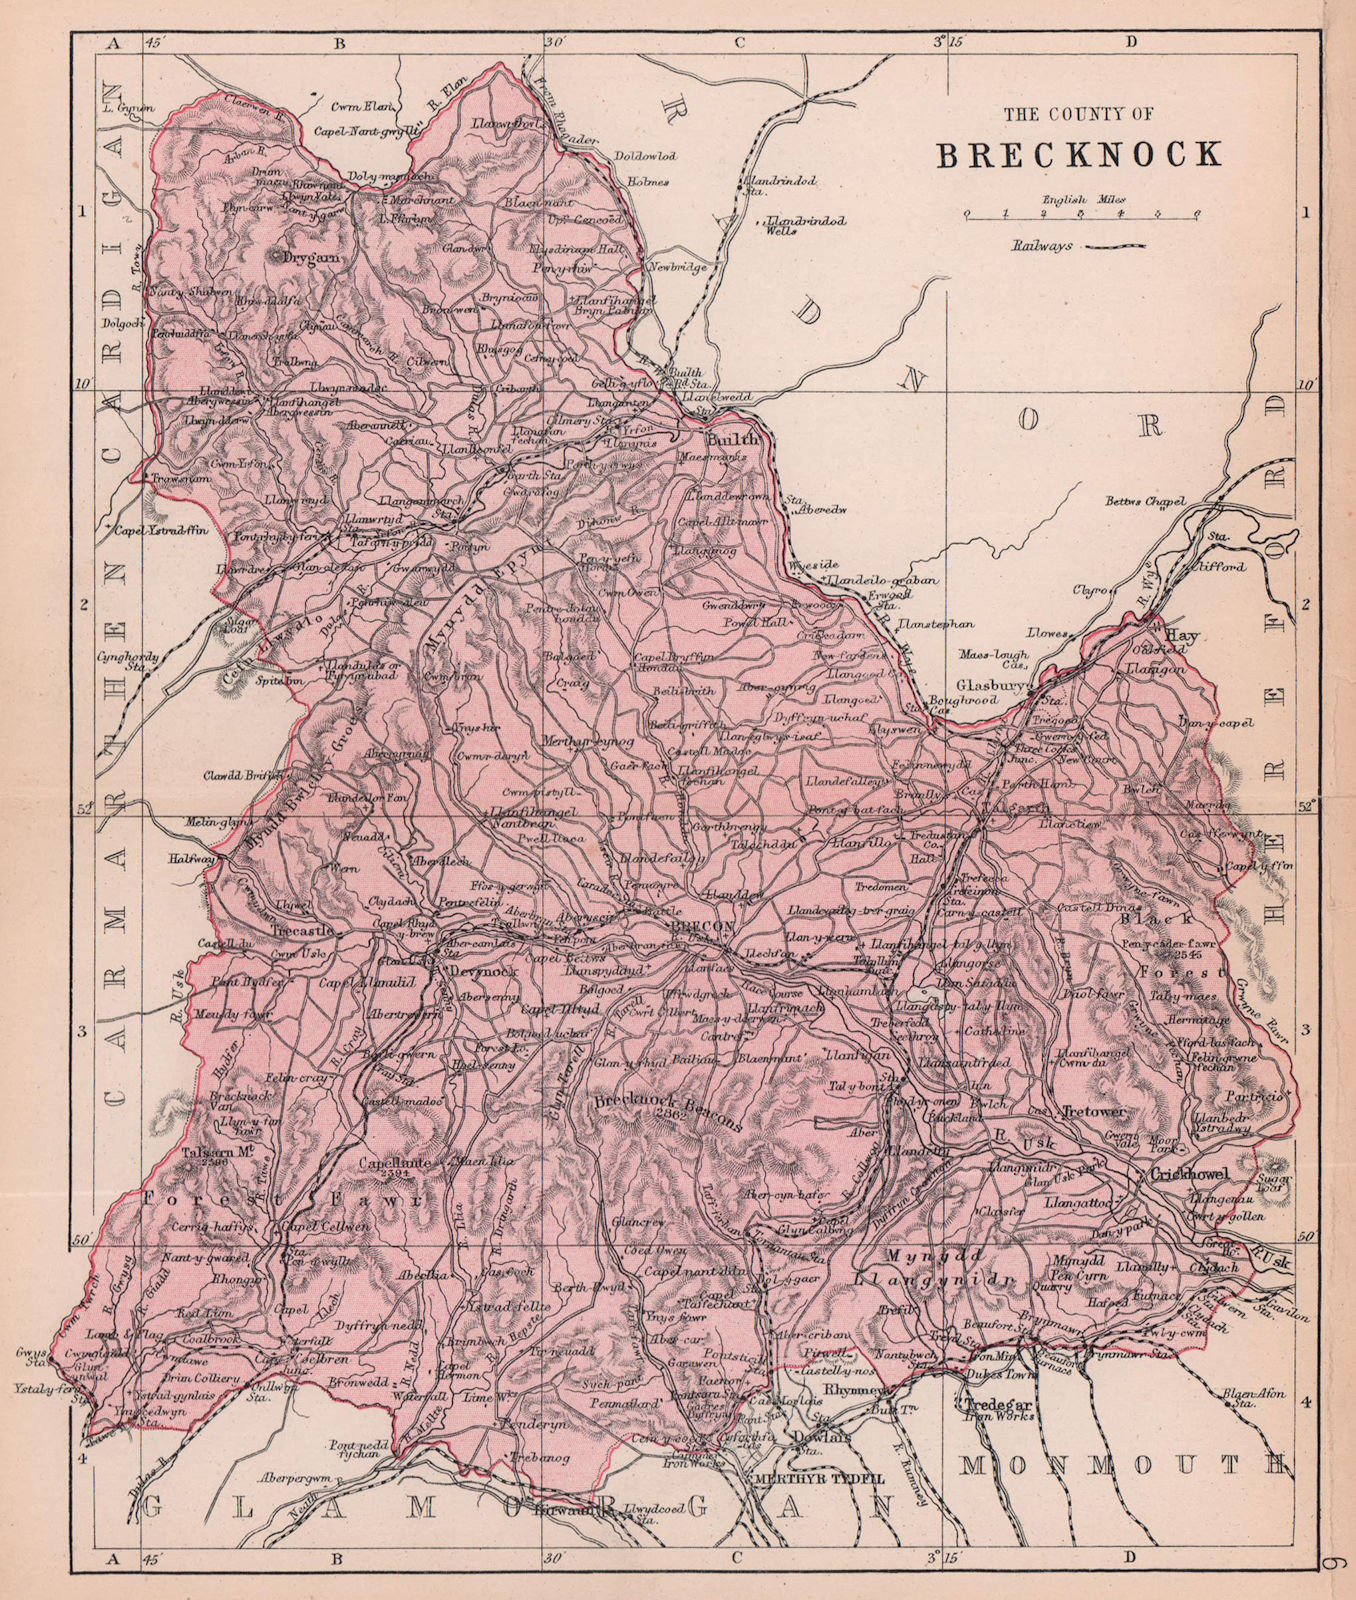 Associate Product BRECKNOCKSHIRE "County of Brecknock" Brecon Beacons Wales BARTHOLOMEW 1882 map